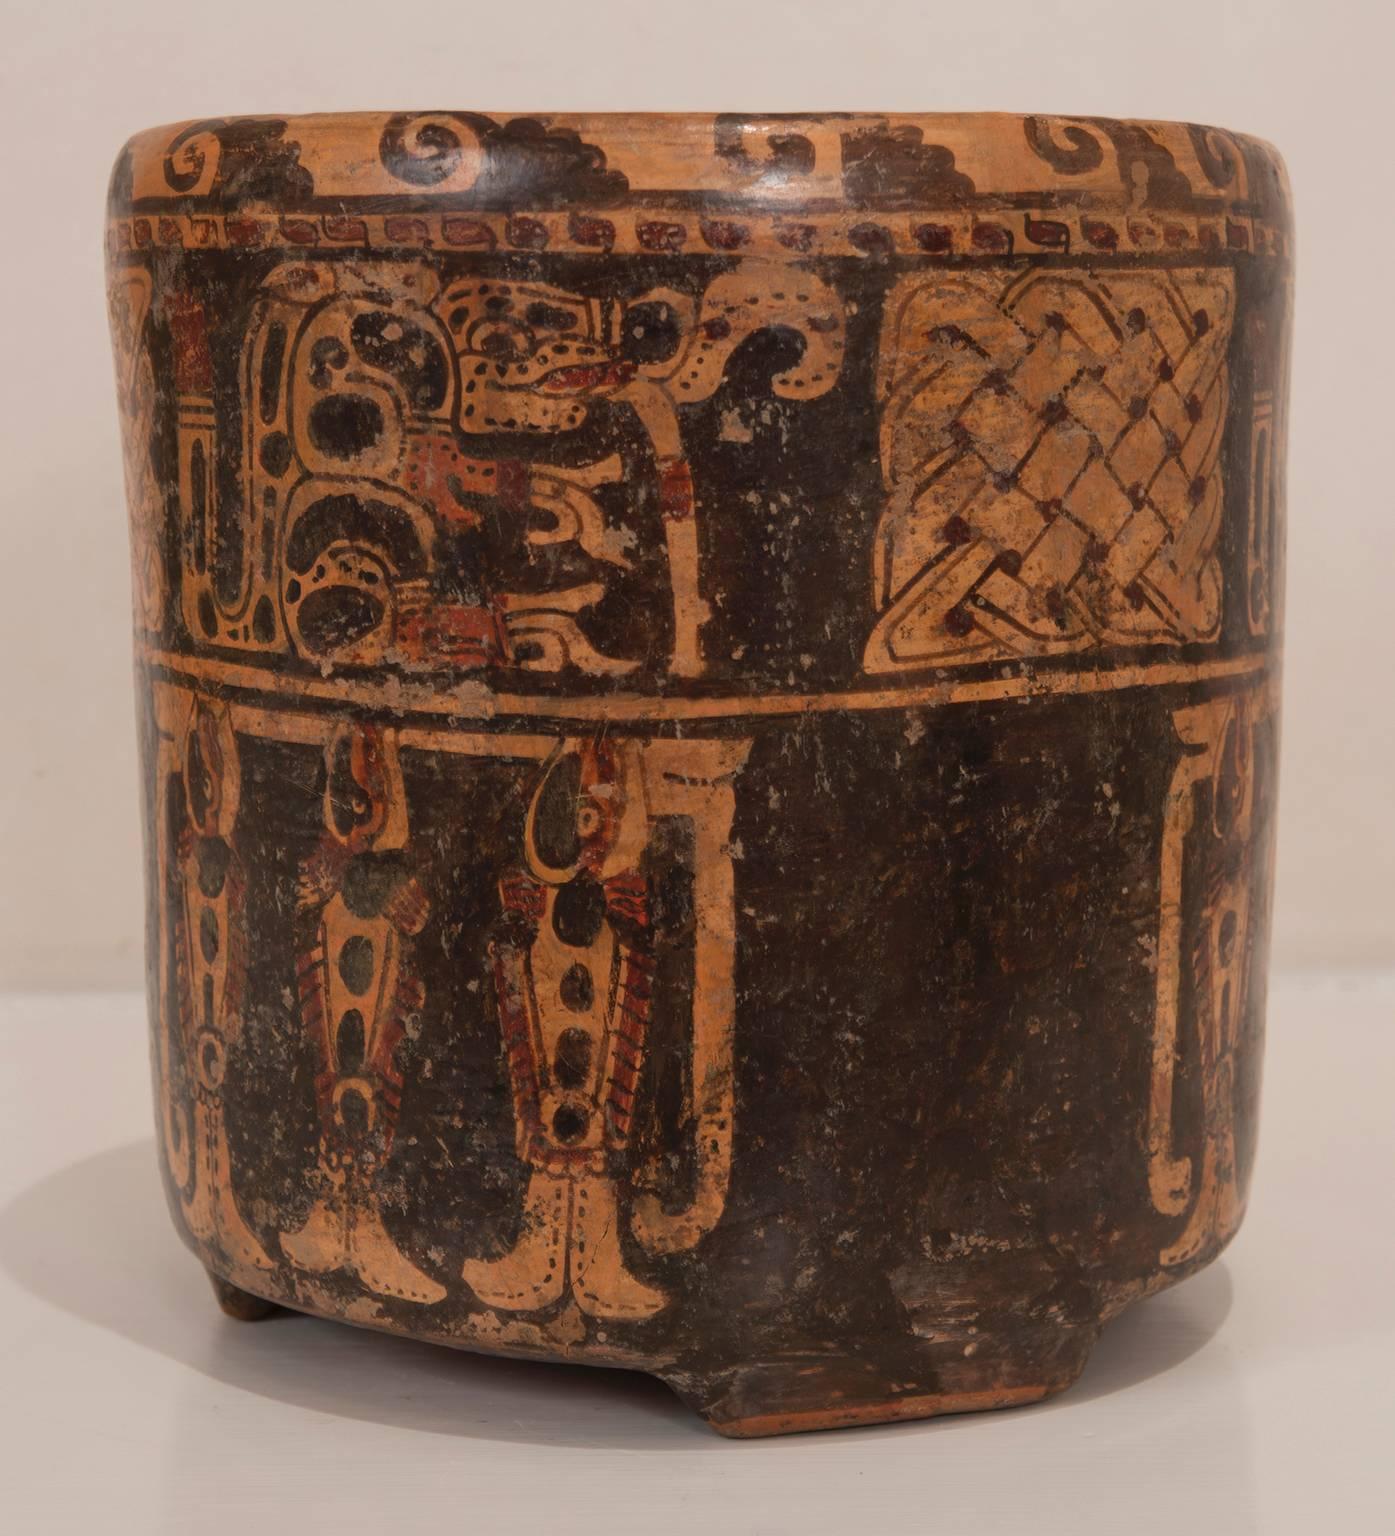 Pre-Columbian, Honduras, Ulua Valley, polychrome pottery cylinder on three nubbin feet painted in shades of red, orange and black. With upper raised band with reateating series of stylized wave glyphs. Lower section painted with two repeated panels,